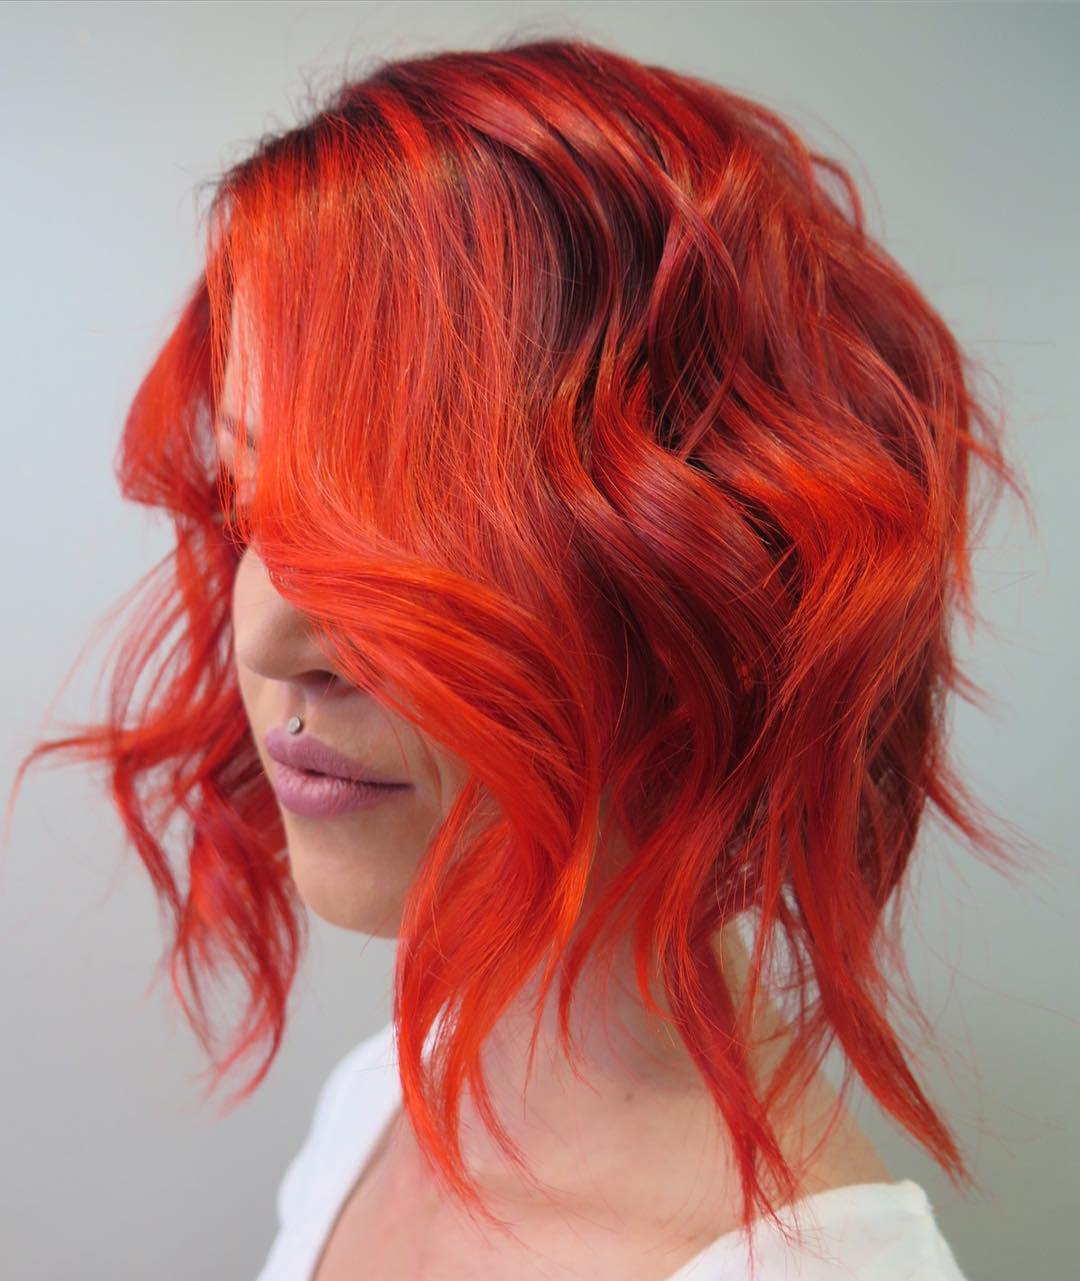 Orange and Red Wavy Logo - Orange Red Wavy Bobresize10802c1281ssl1 Coral Hair Color Exceptional ...